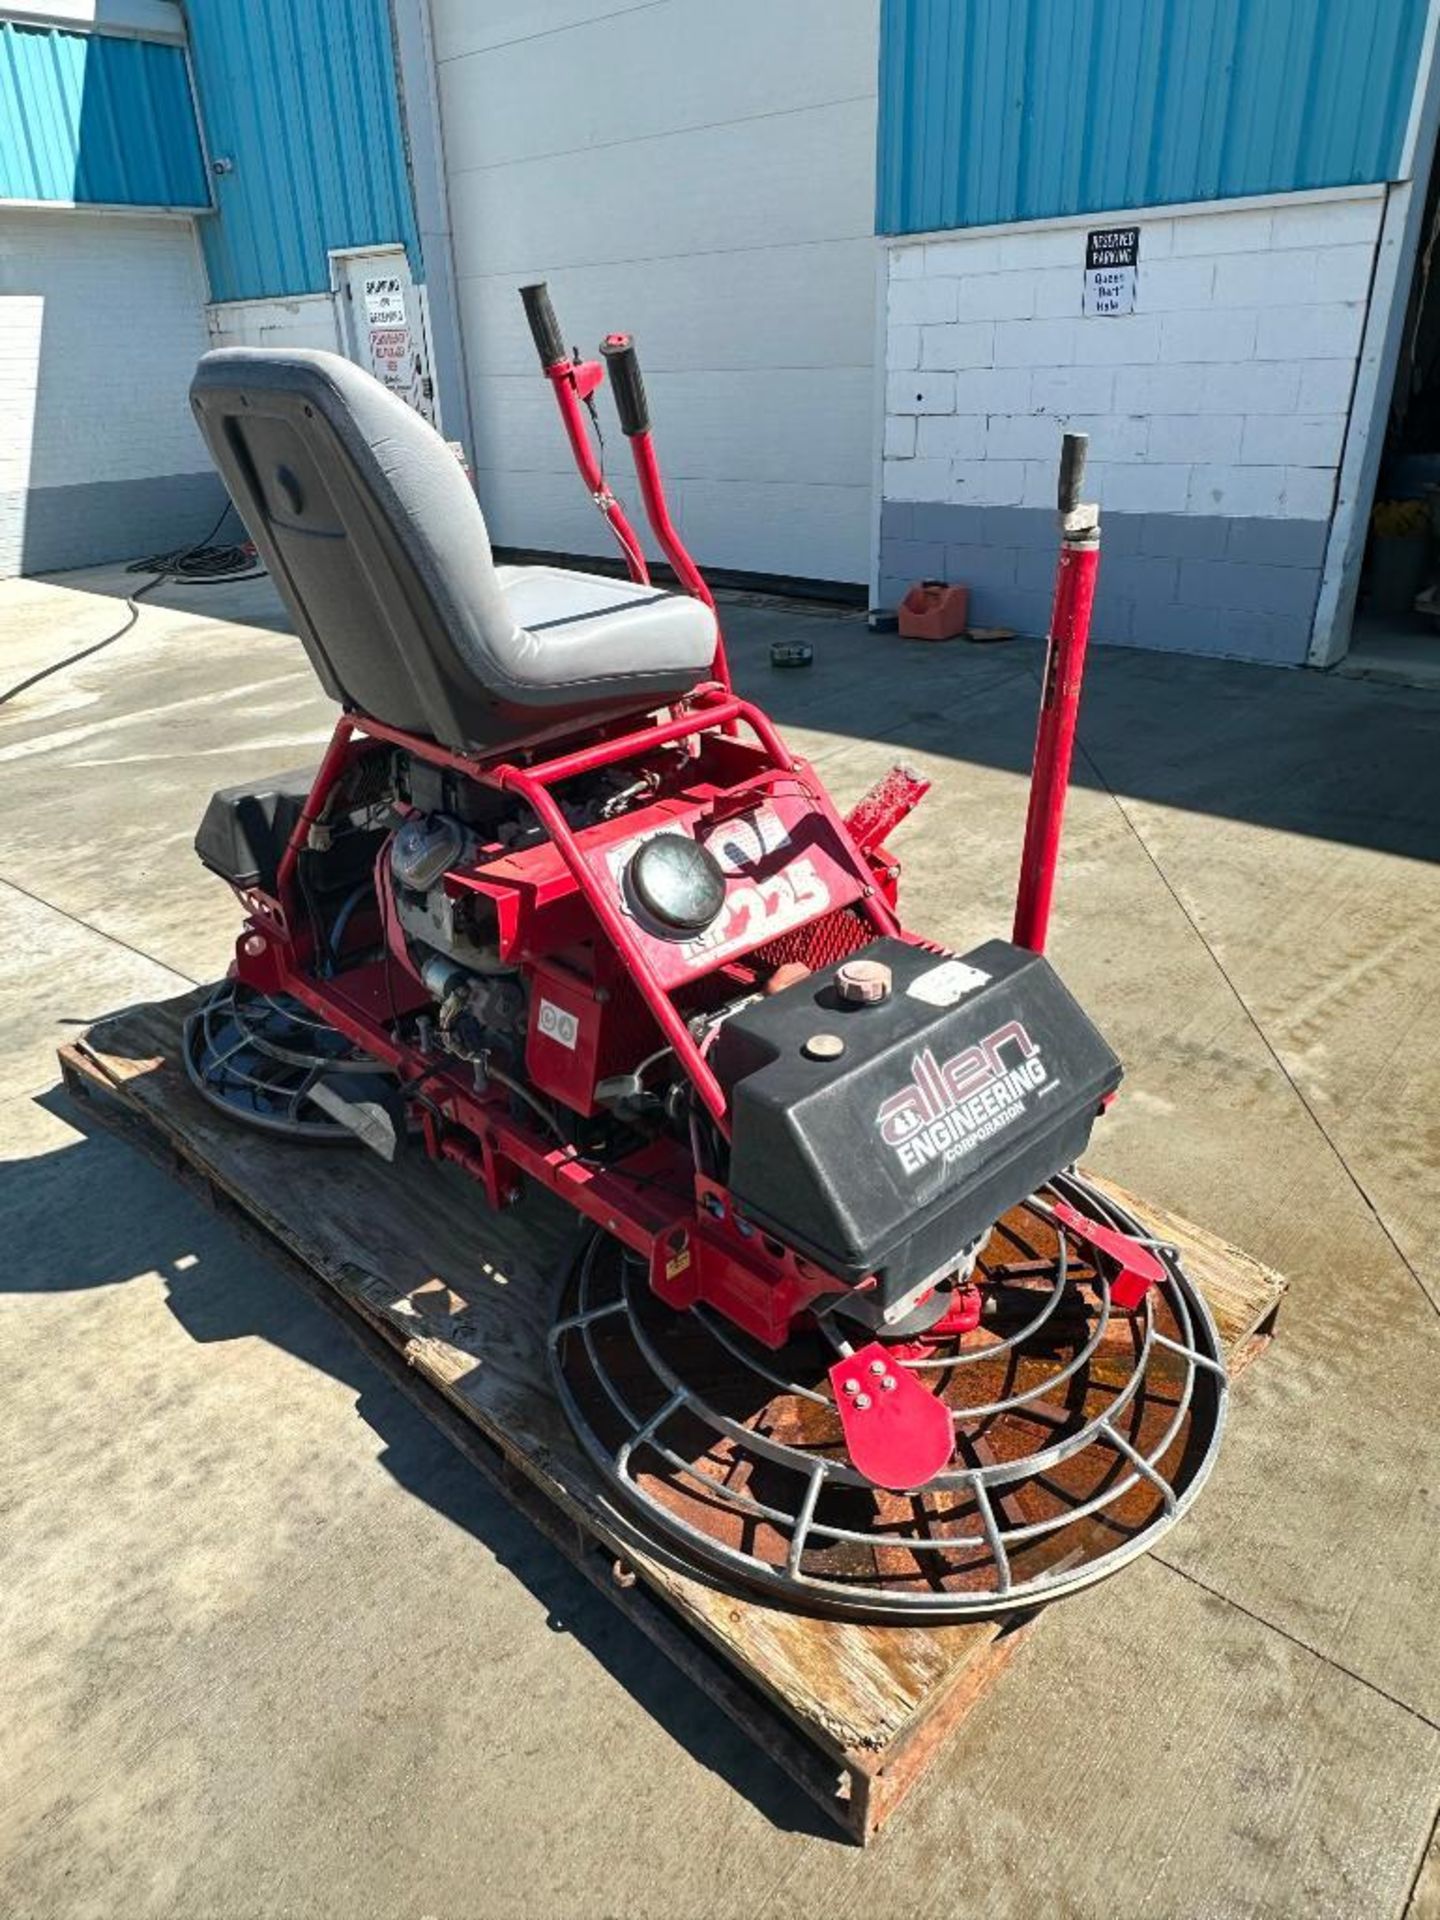 Allen MP225 ride-on edge concrete power trowel, Honda 24hp engine, manual pitch control, finish - Image 6 of 11